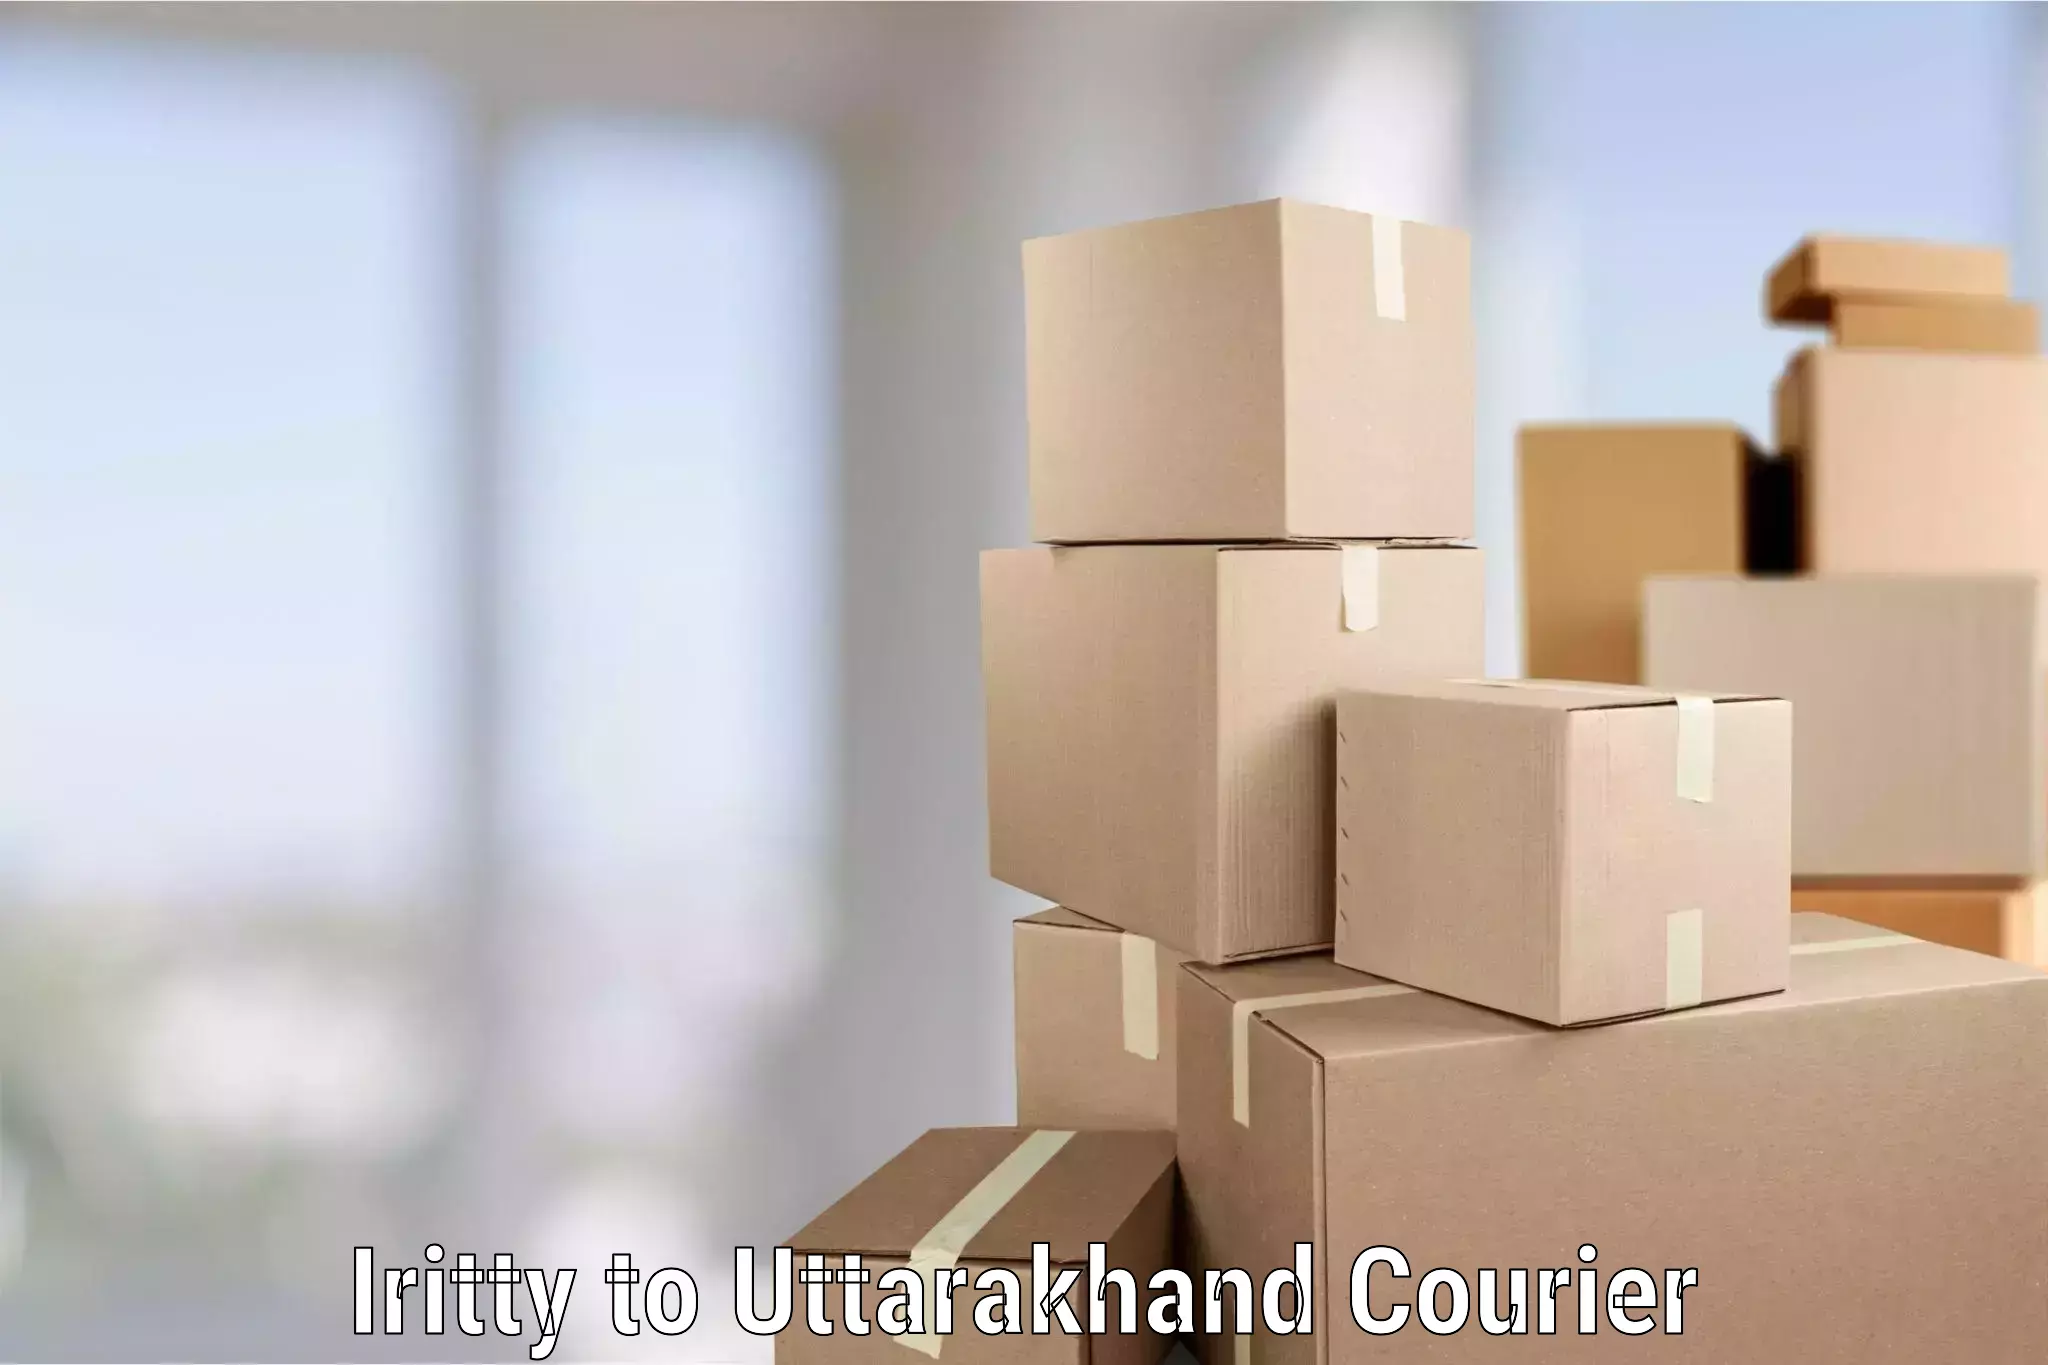 Moving and handling services Iritty to Rishikesh